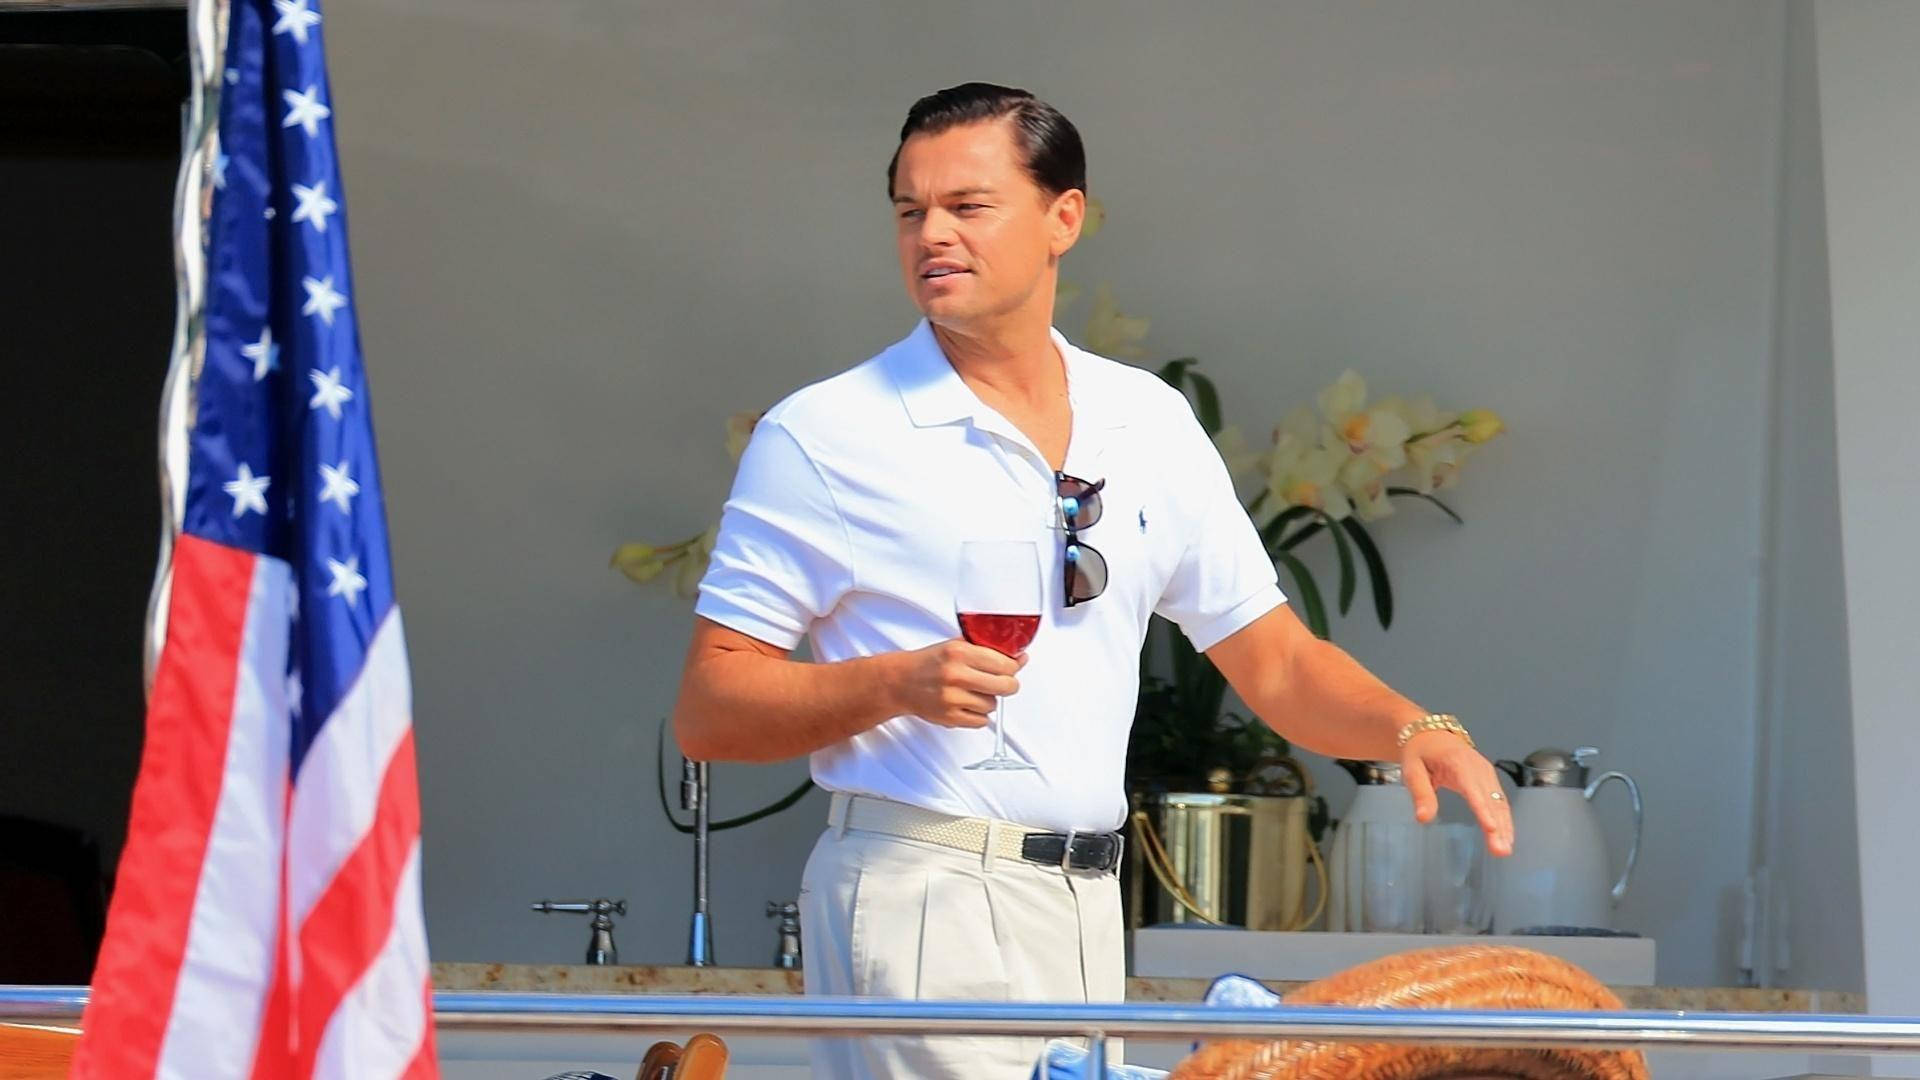 1920X1080 Wolf Of Wall Street Wallpaper and Background